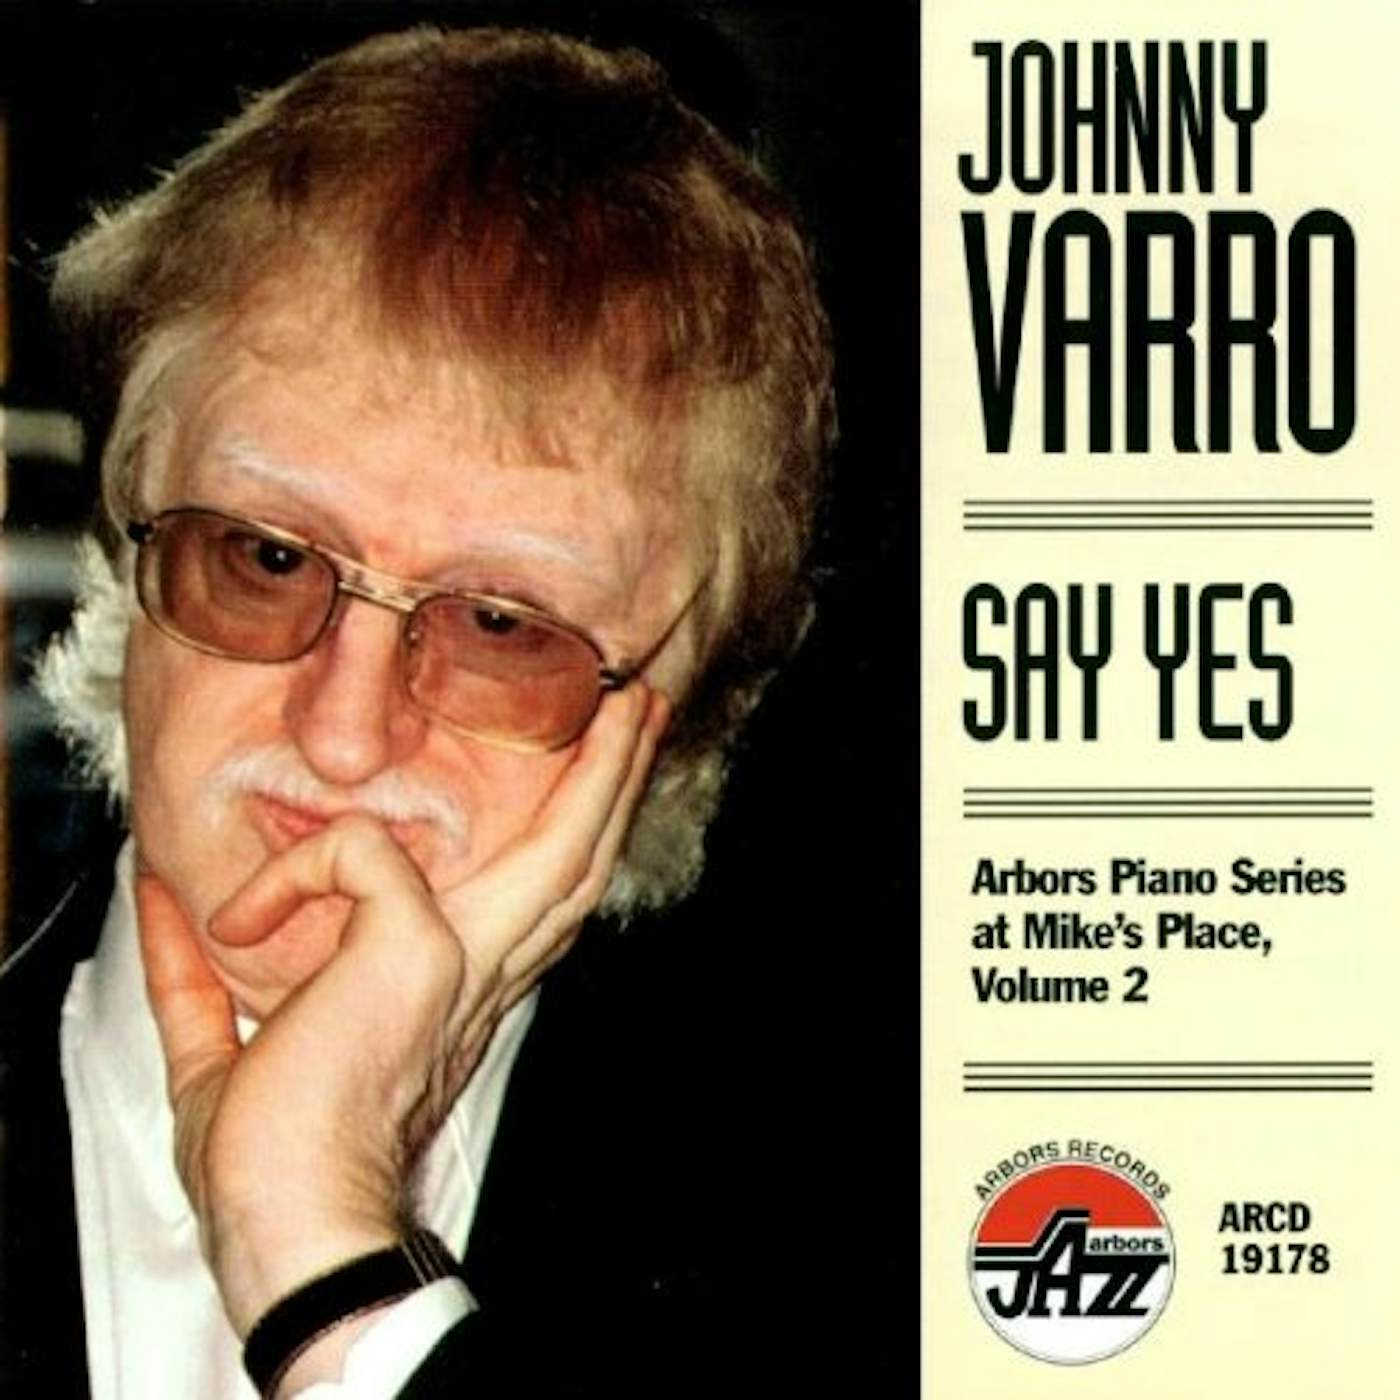 Johnny Varro SAY YES - ARBORS PIANO SERIES AT MIKE'S PLACE 2 CD